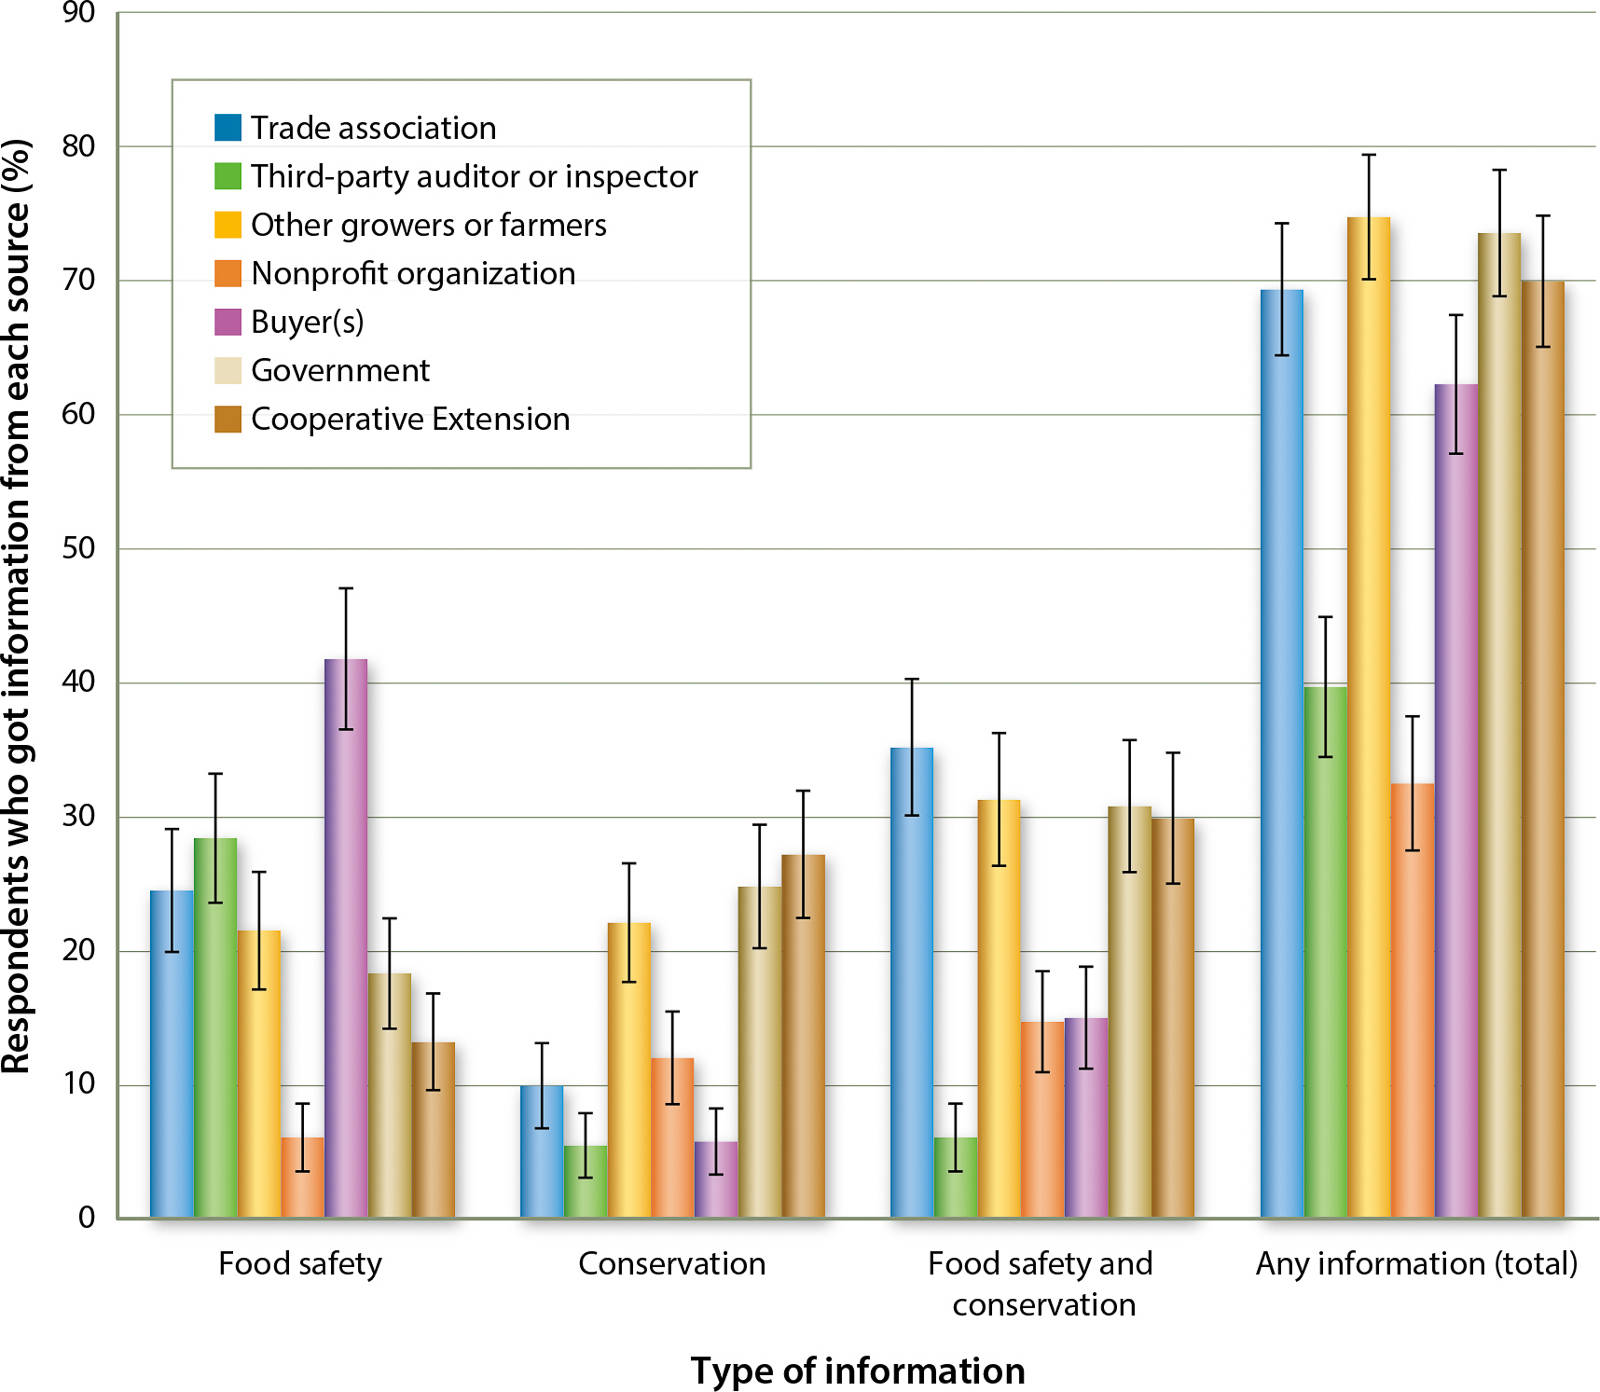 Sources of food safety and conservation information for California produce growers (n = 336). Lines denote 95% confidence intervals.